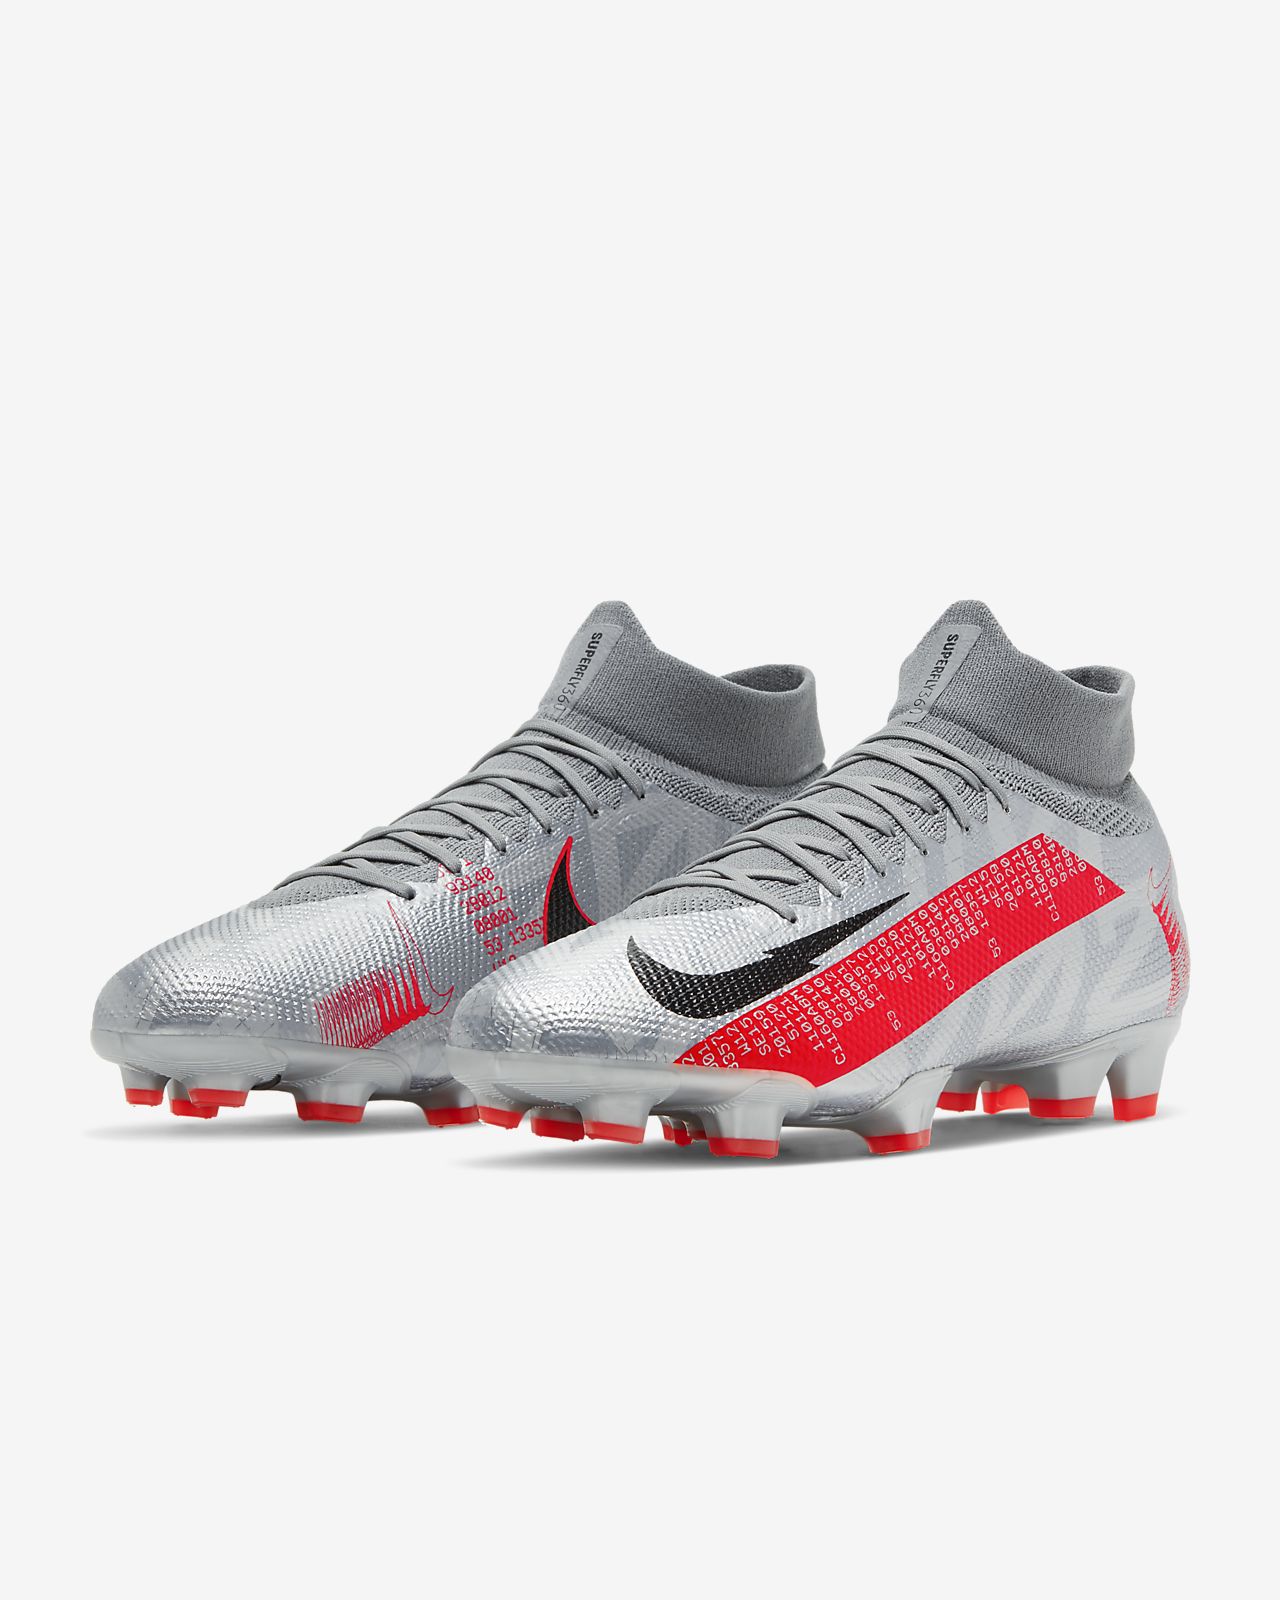 Artificial Grass Soccer Shoes Nike Mercurial Superfly 7 Pro Ag Pro.